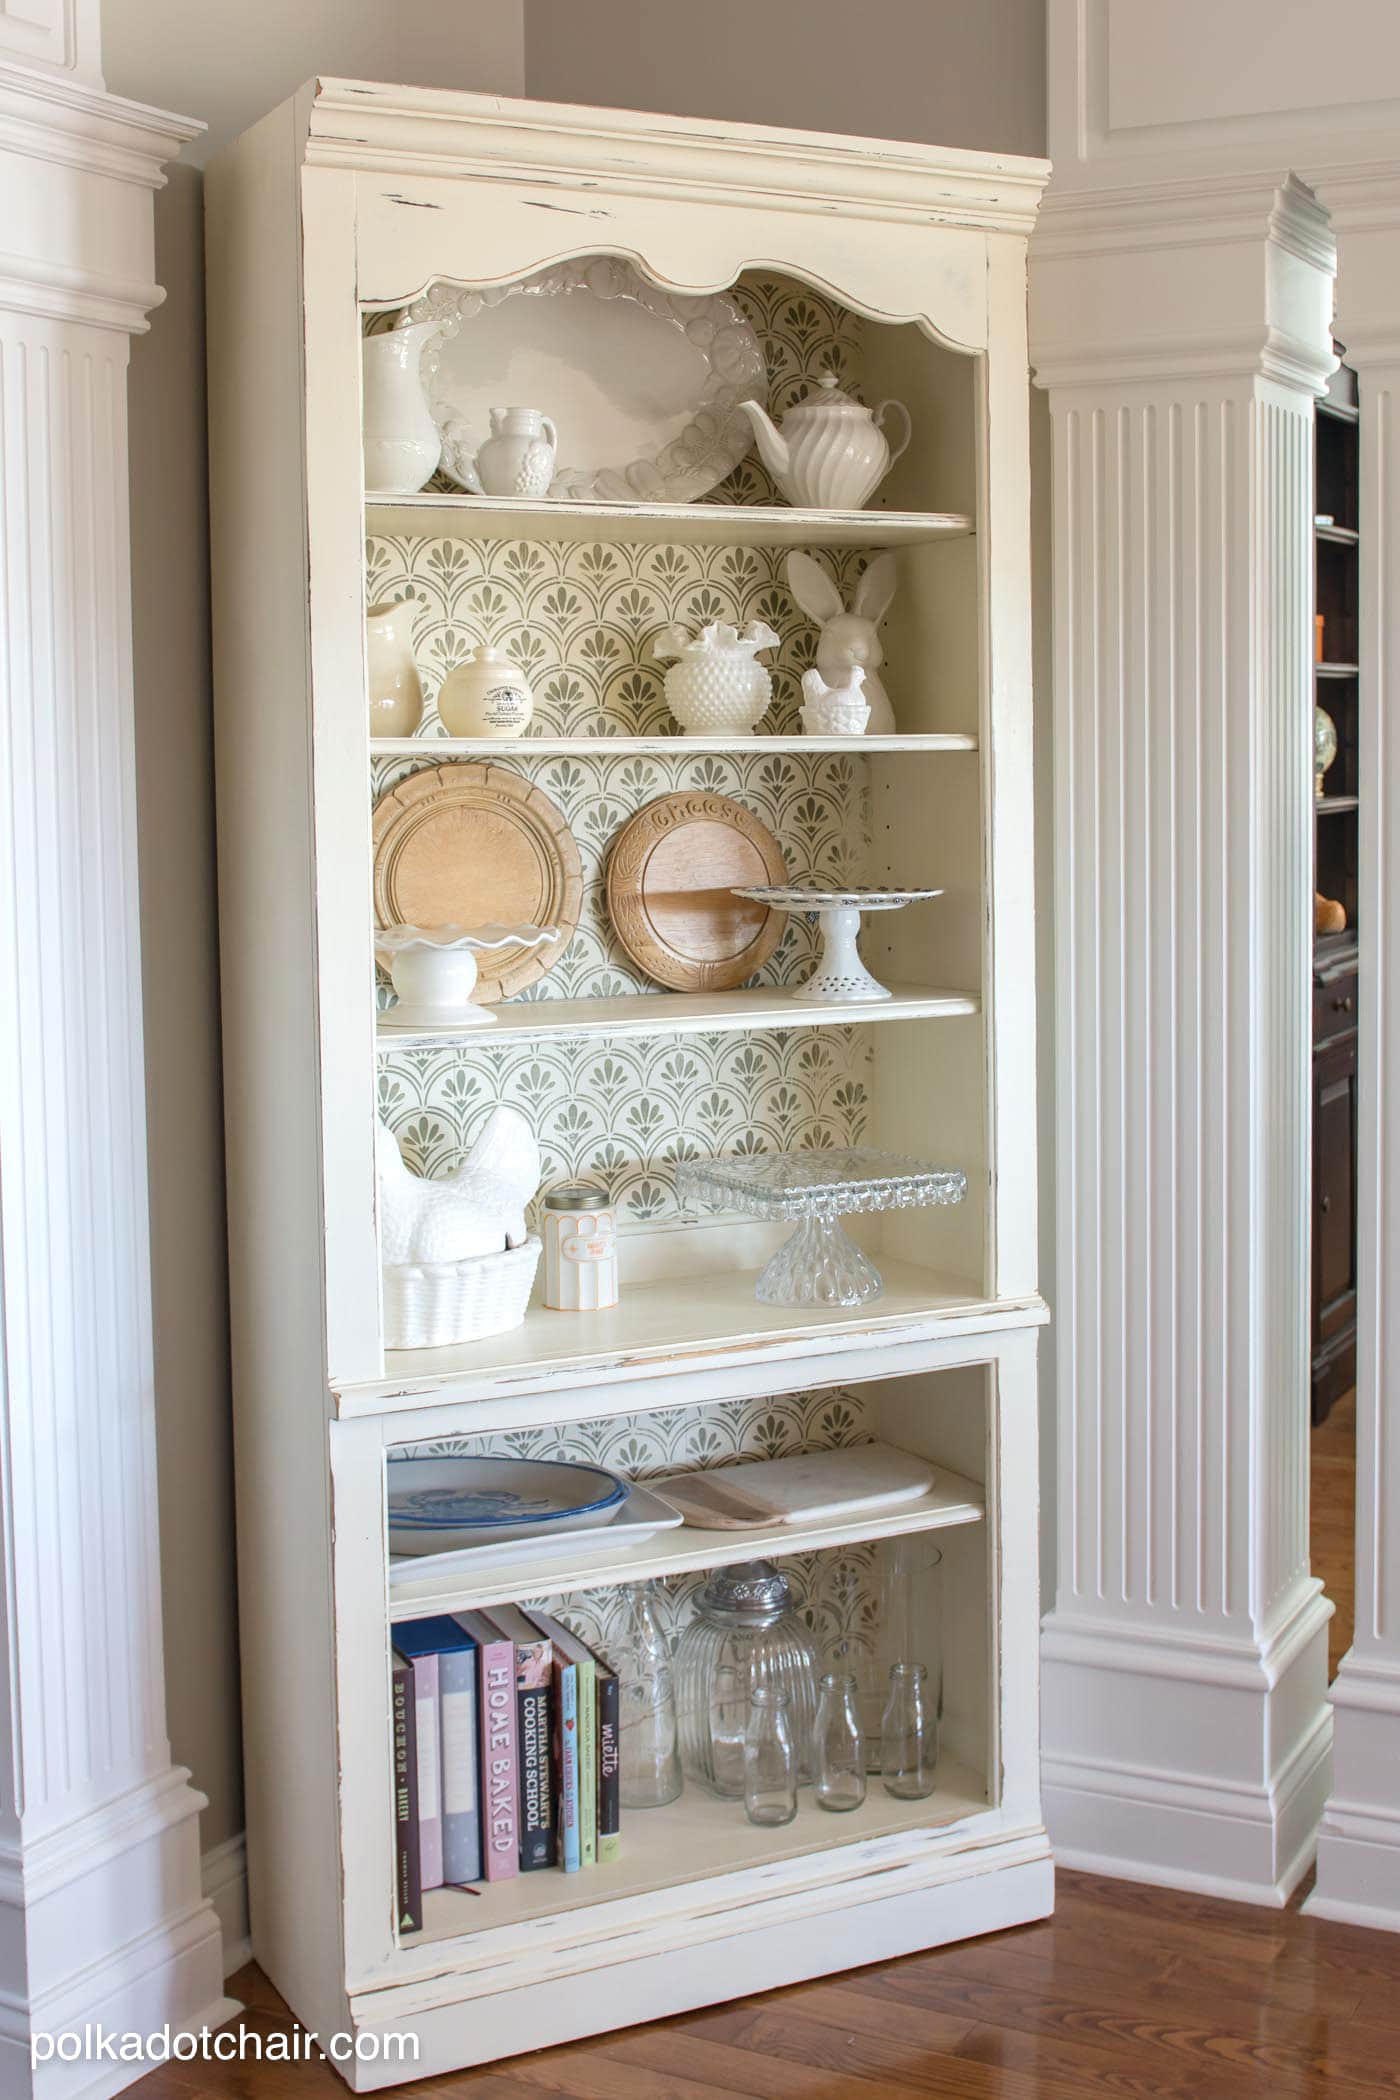 DIY Stenciled Bookcase Project, she painted the bookcase with chalk paint then stenciled a pattern onto the back, looks pretty simple